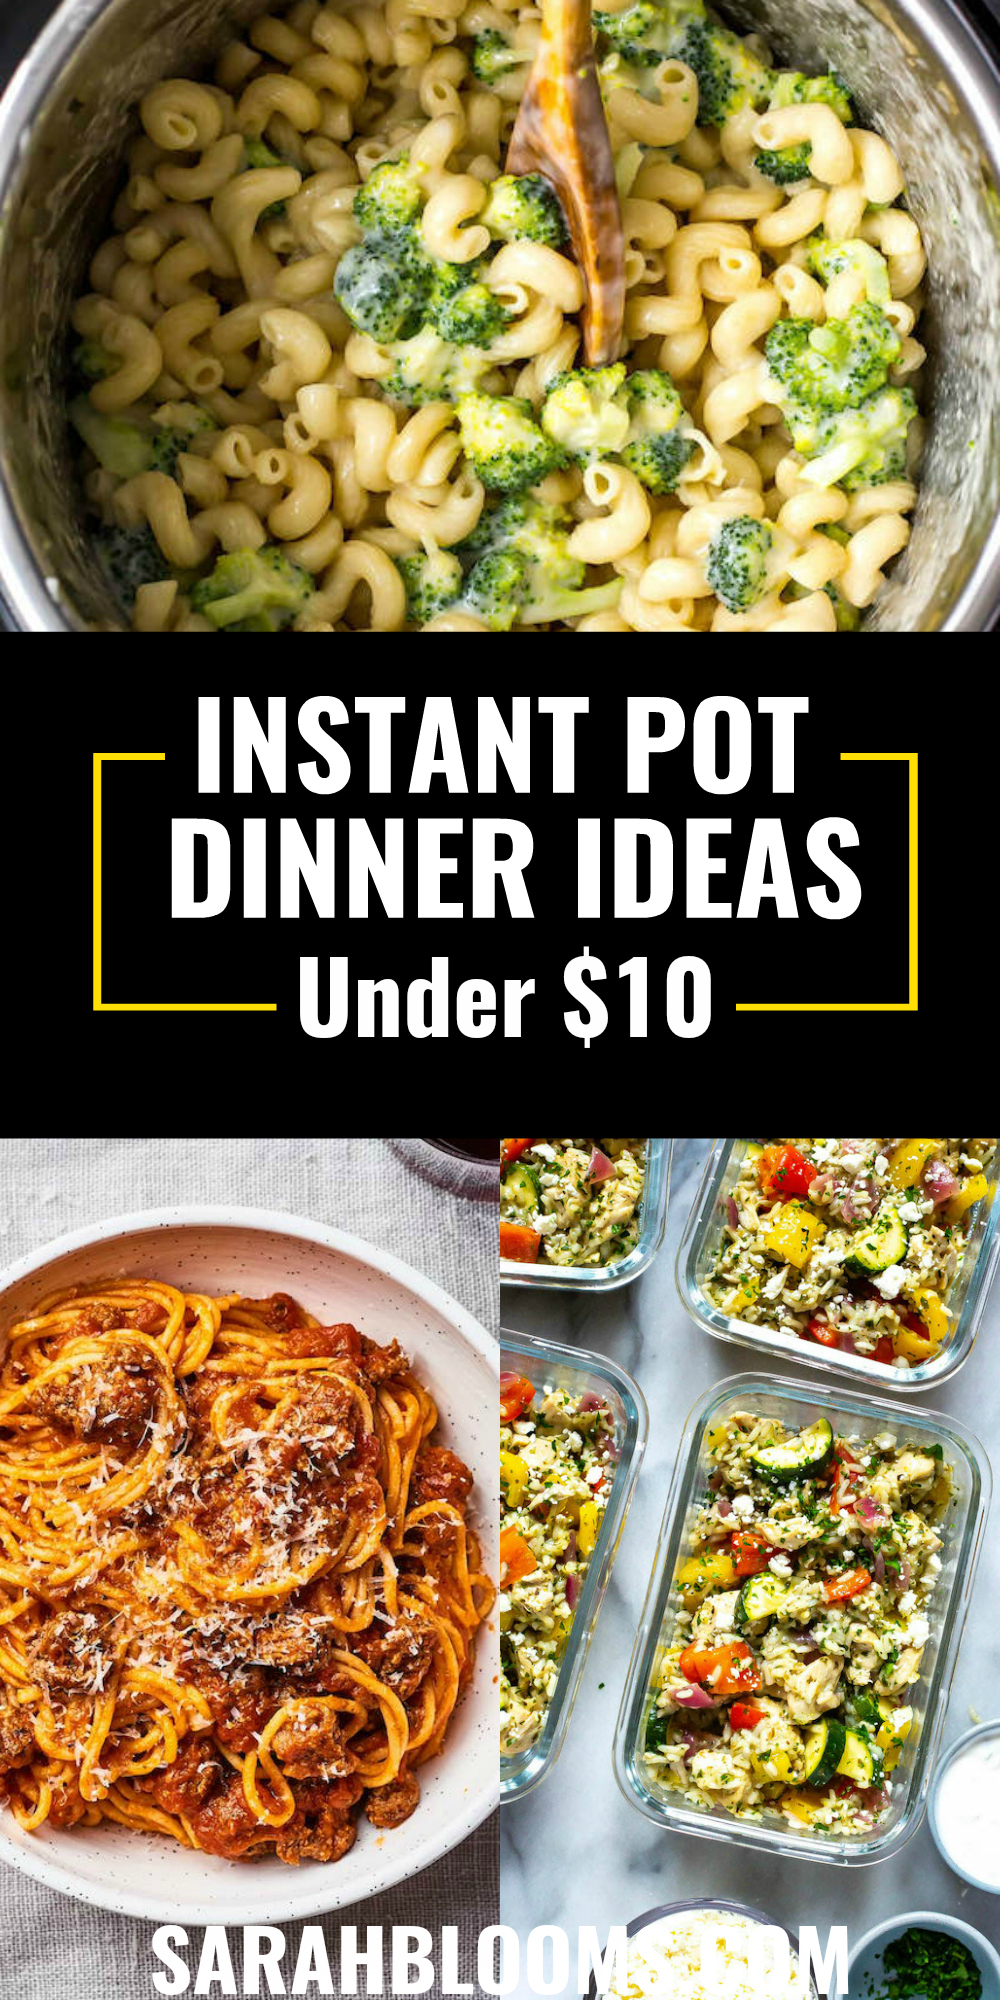 Check out these quick and easy Instant Pot recipes you can make in 30 minutes or less for under $10! #instantpot #instantpotrecipes #quickmeals #budgetmeals #SarahBlooms